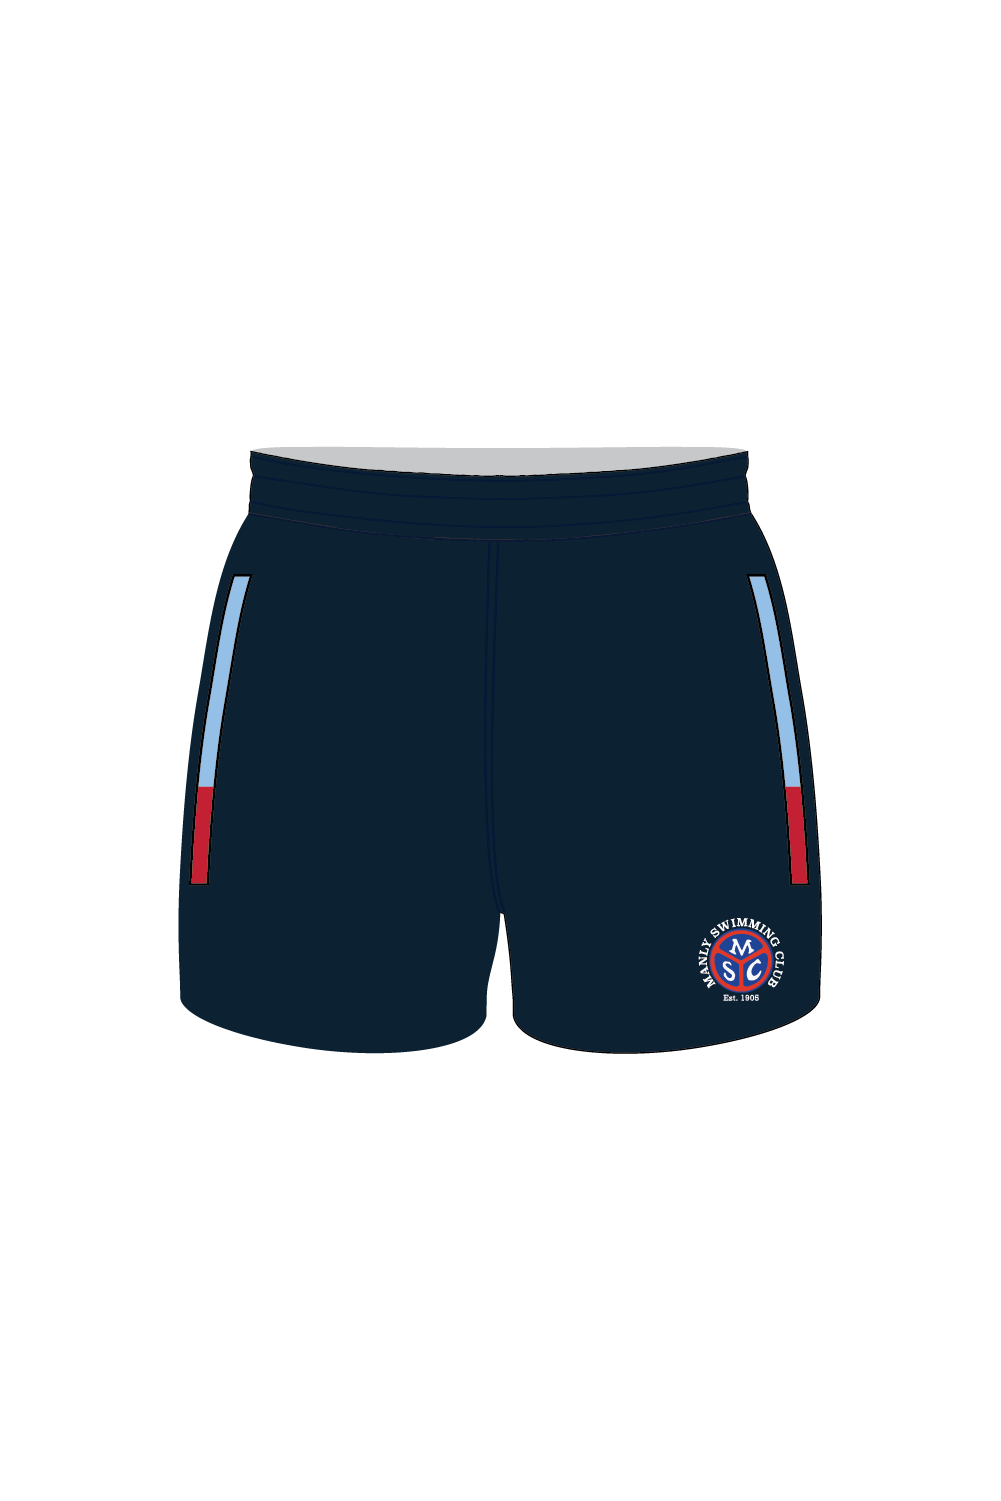 Manly Swimming Club Women's Shorts